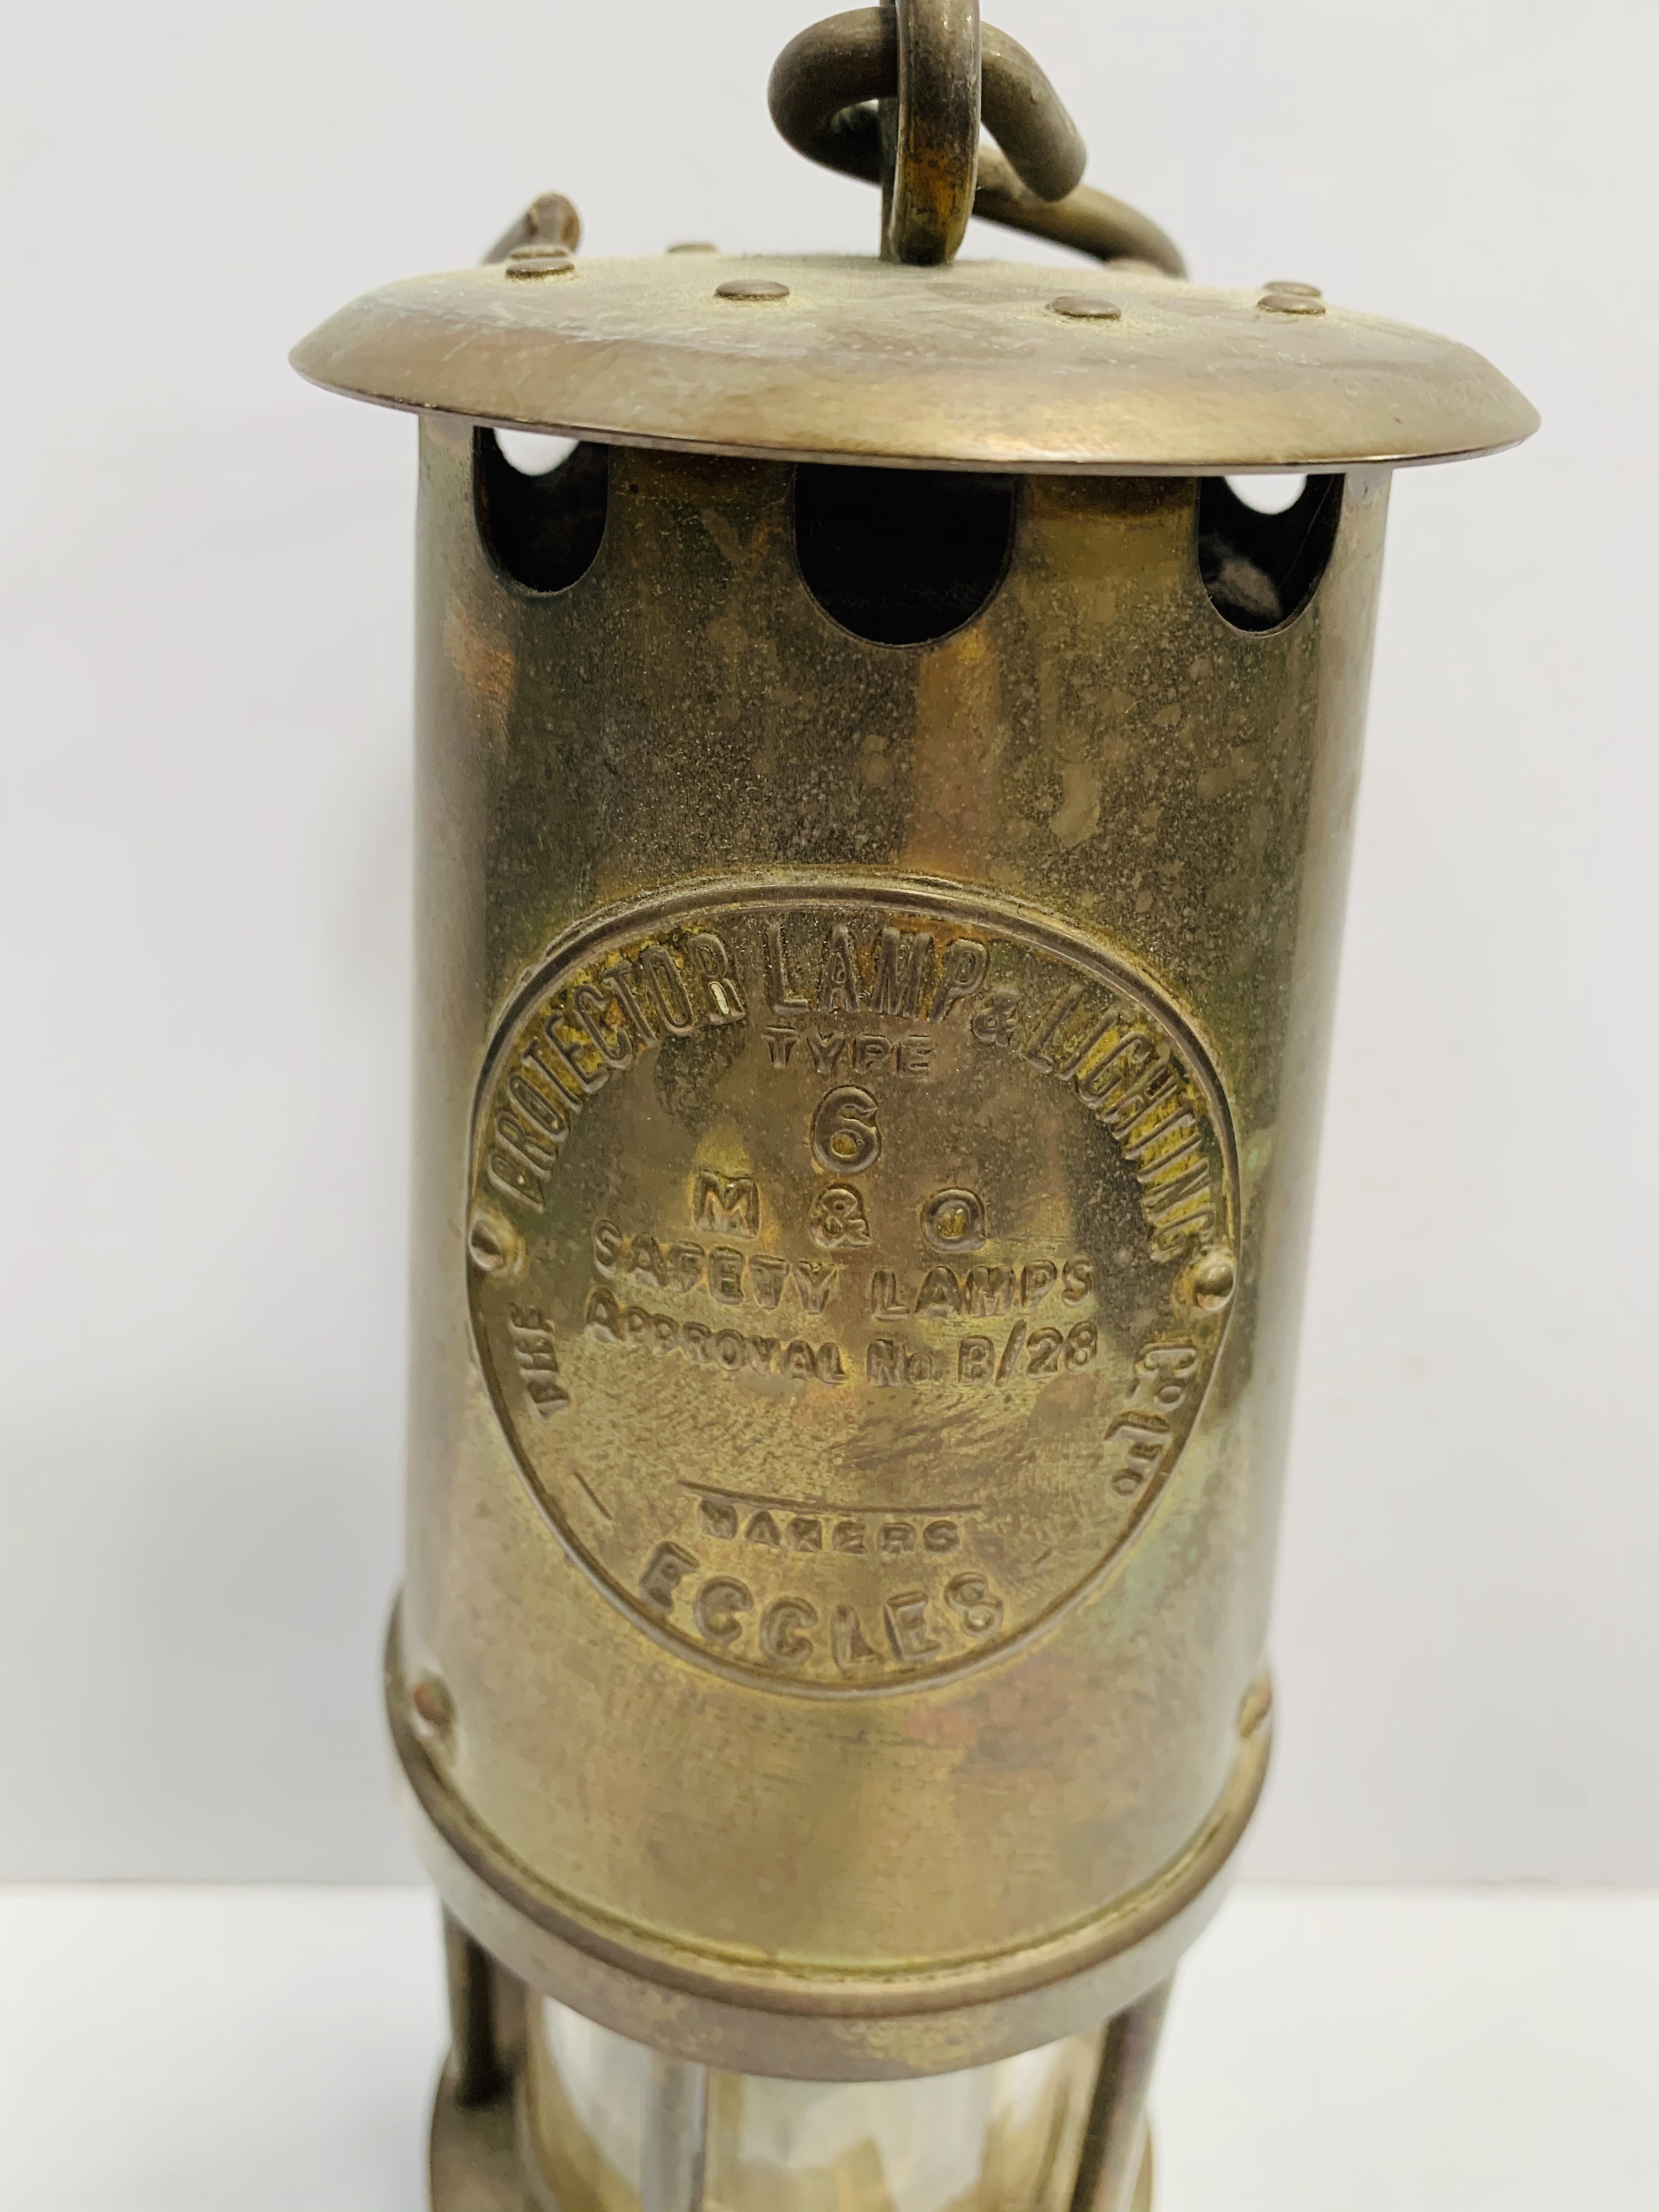 Protector Lamp & Lighting Company of Eccles brass & steel miner's safety lamp, Type 6 M&Q. - Image 2 of 2